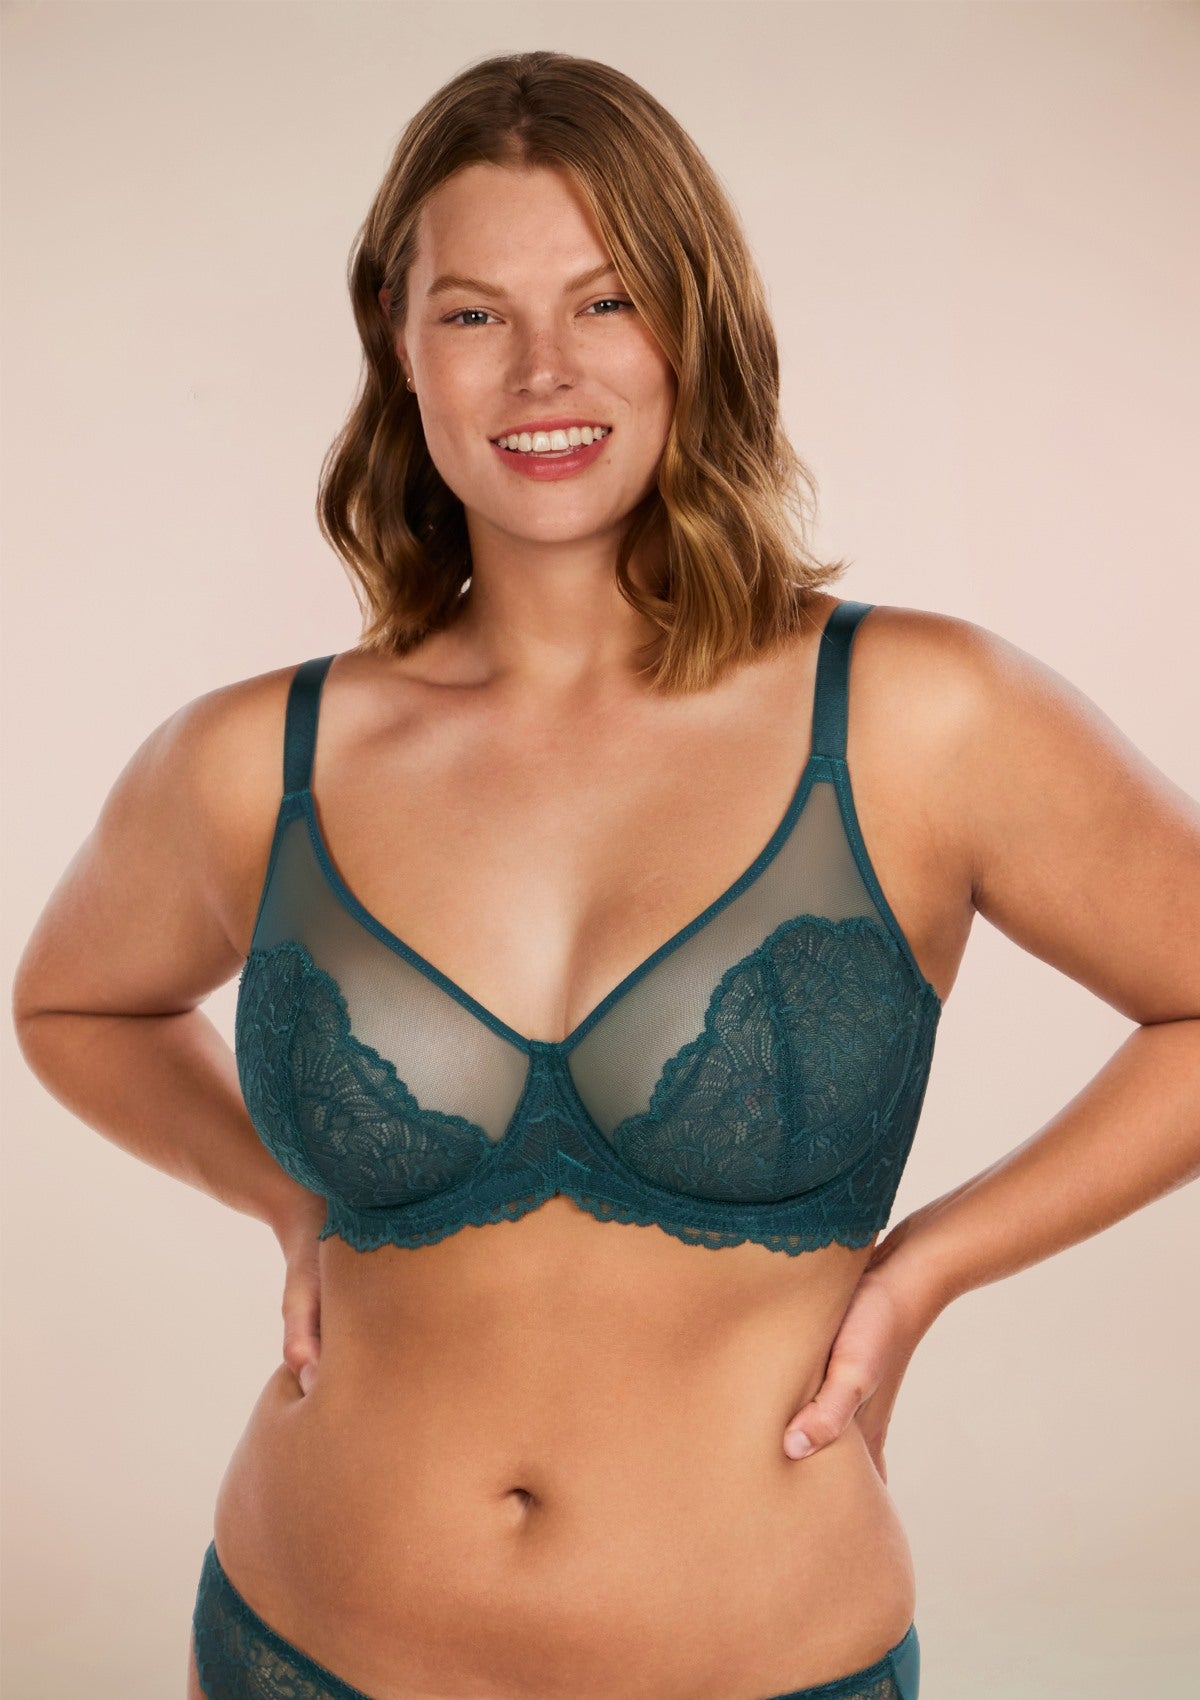 HSIA Blossom Full Figure See-Through Lace Bra For Side And Back Fat - Biscay Blue / 38 / DDD/F